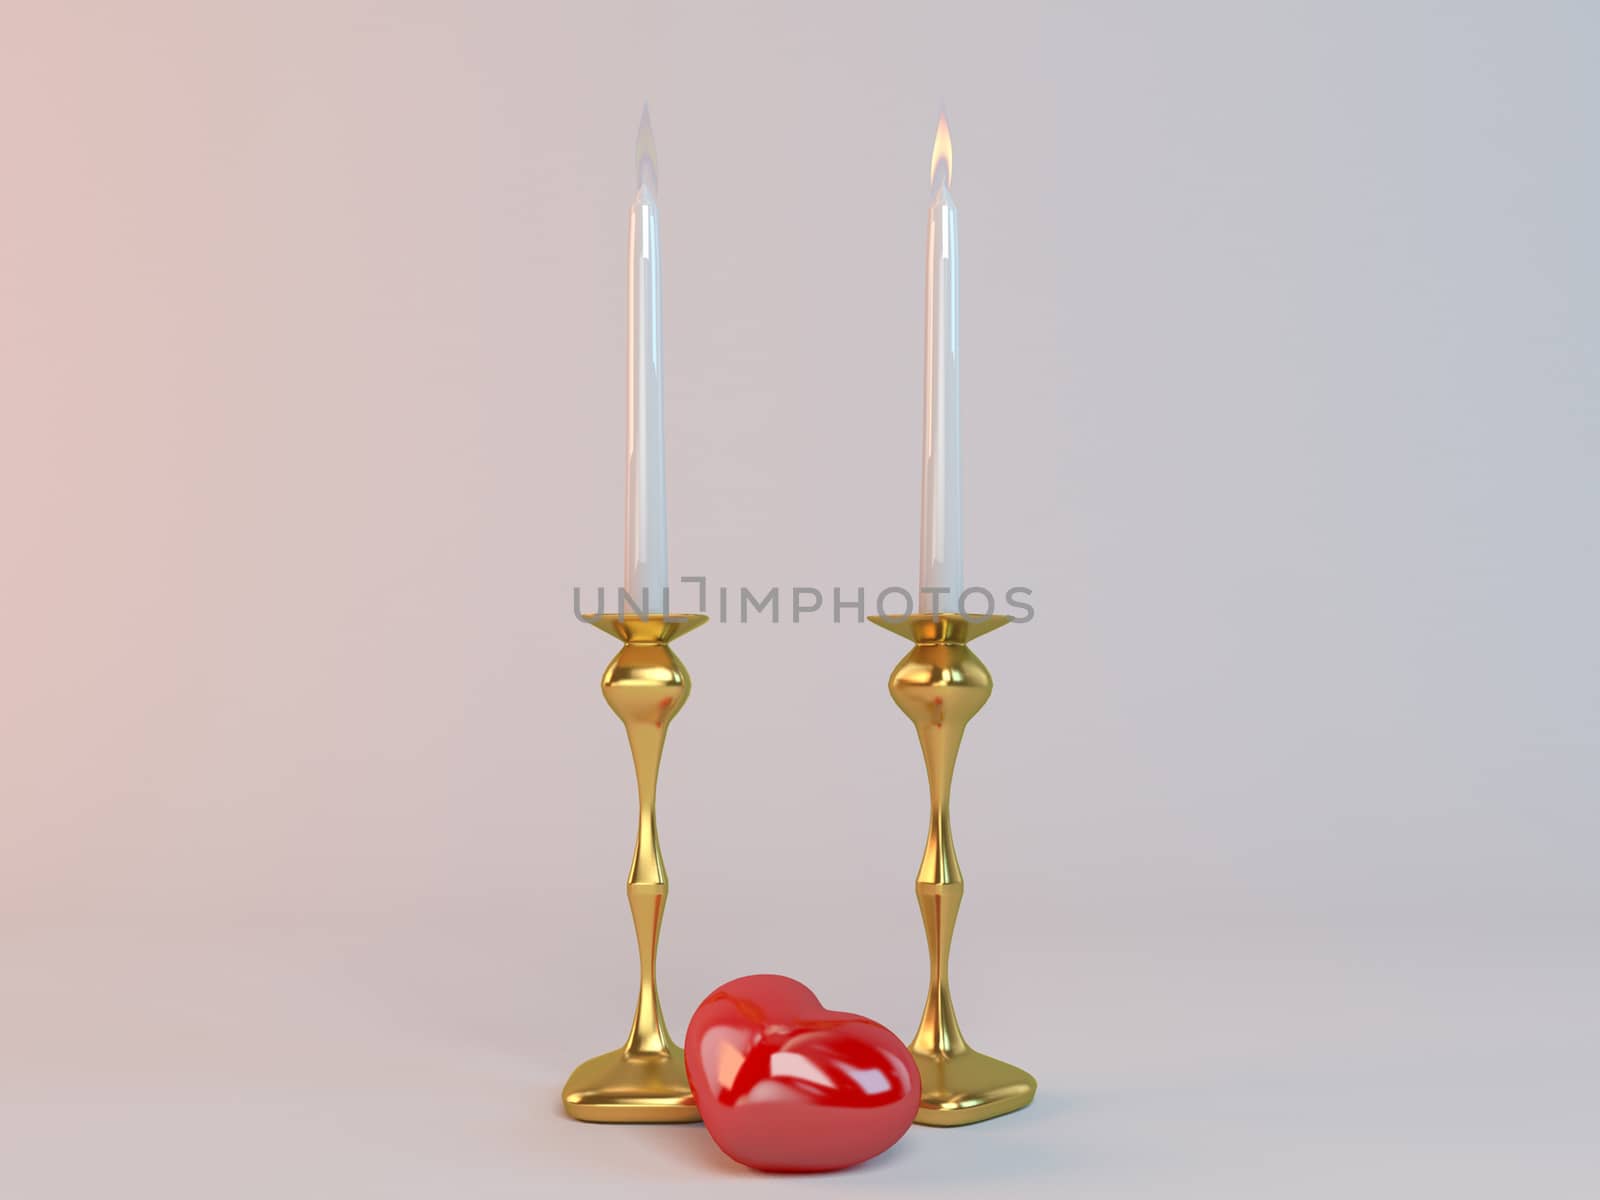 One side love where one candle flame is active and the other is down